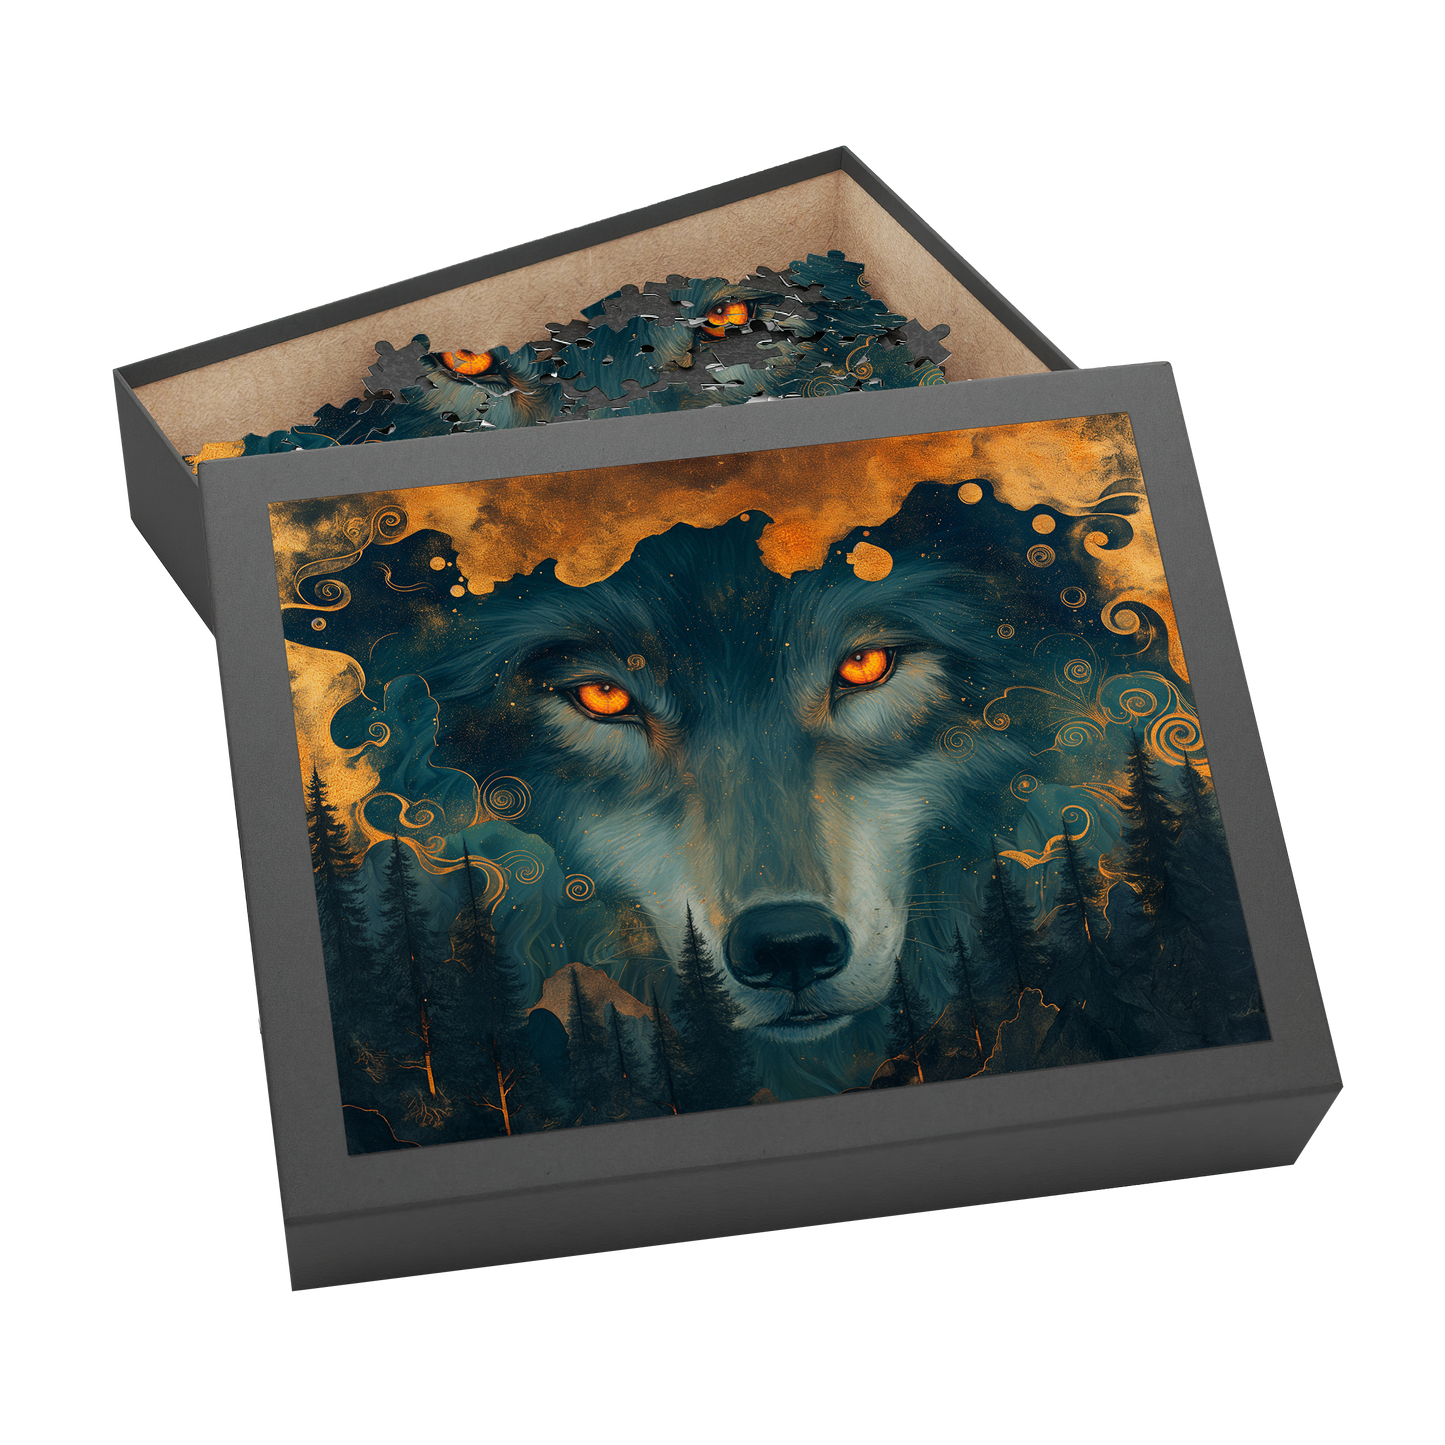 Hunters 10 - Premium Jigsaw Puzzle, Majestic, Primal - Multiple Sizes Available